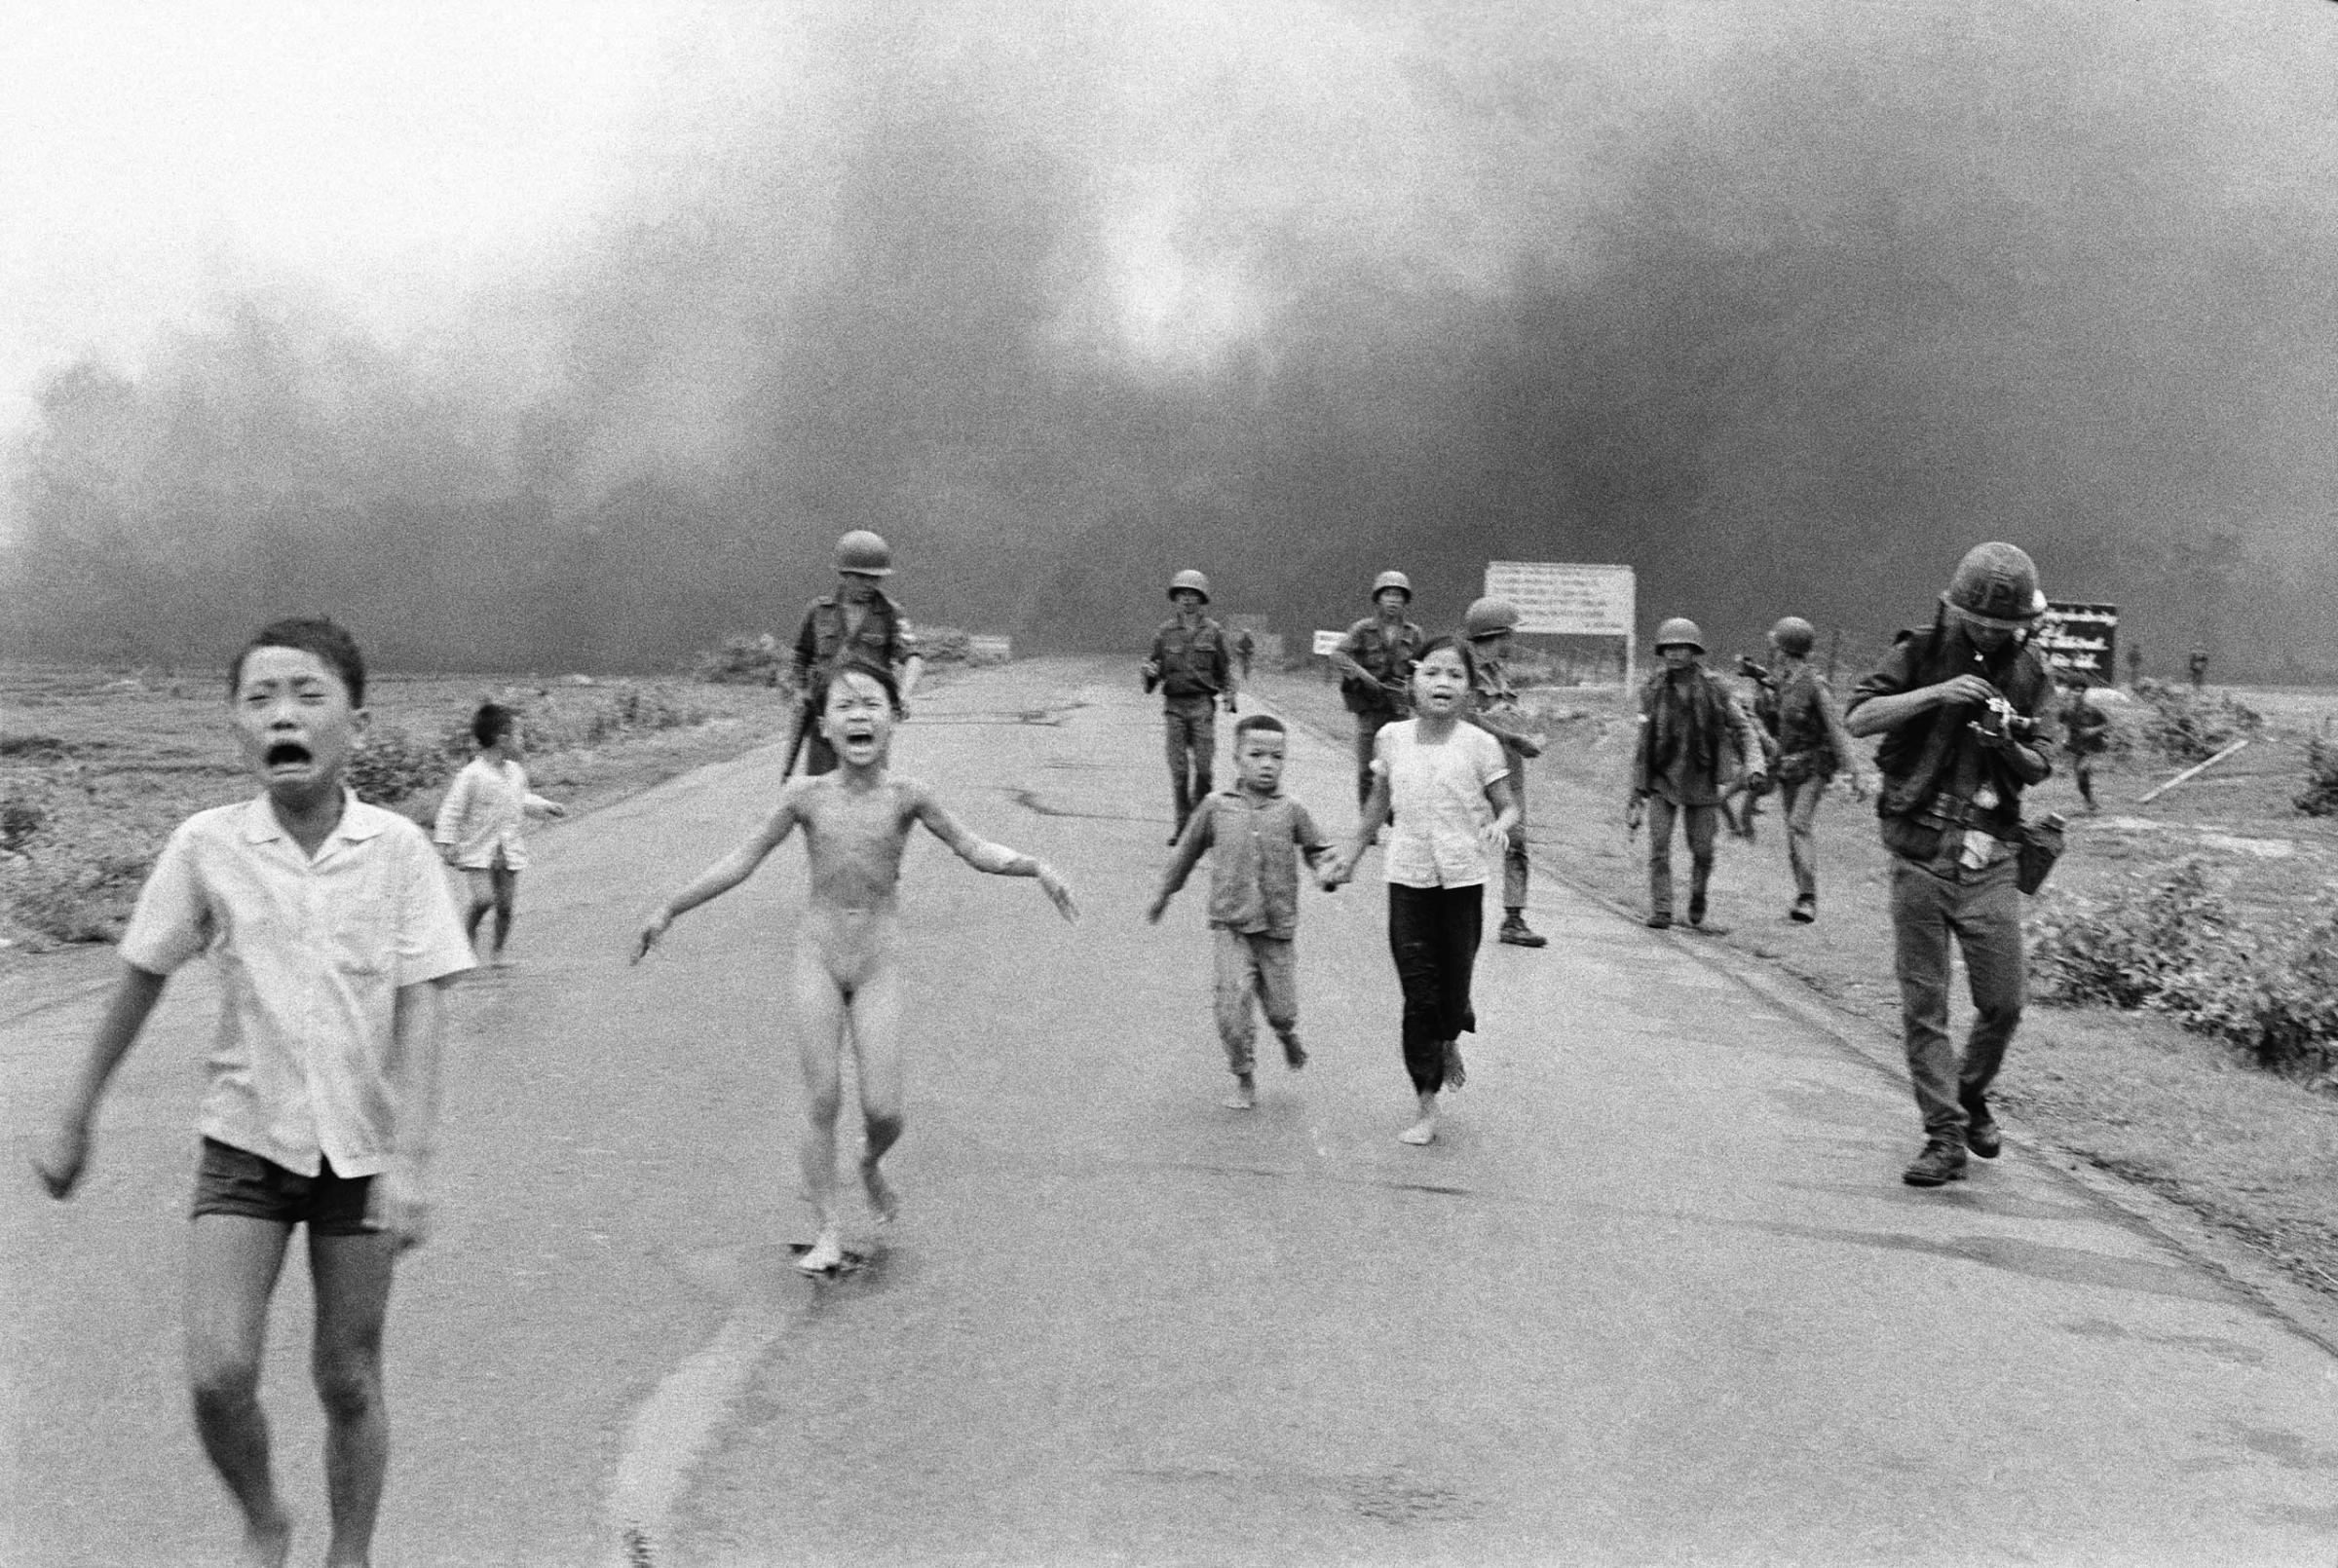 South Vietnamese forces follow after terrified children, including 9-year-old Kim Phuc (center) as they run down Route 1 near Trang Bang after an aerial napalm attack on suspected Viet Cong hiding places on June 8, 1972.